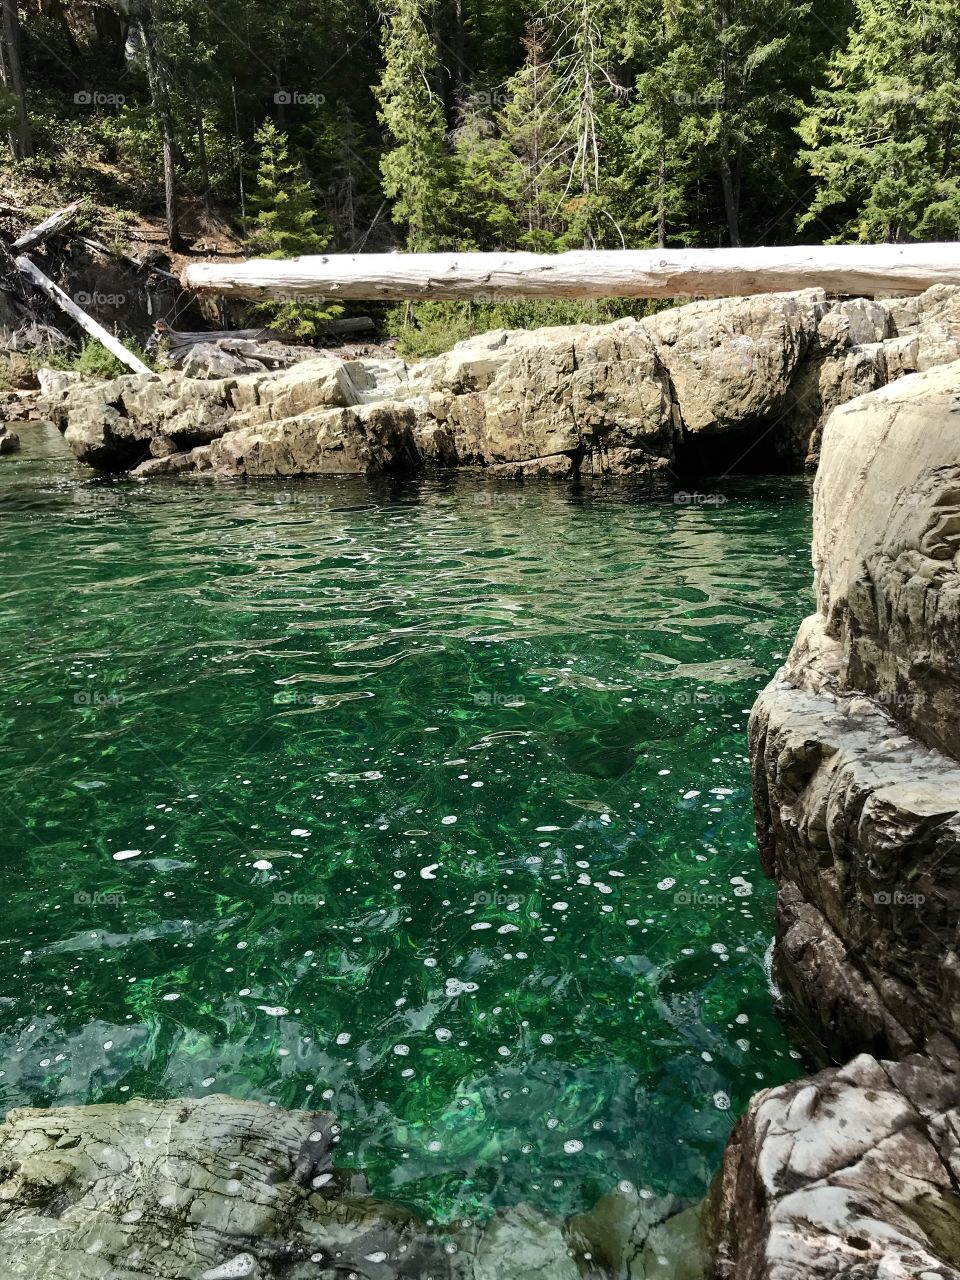 Natural emerald pool, sparkling in the sun.